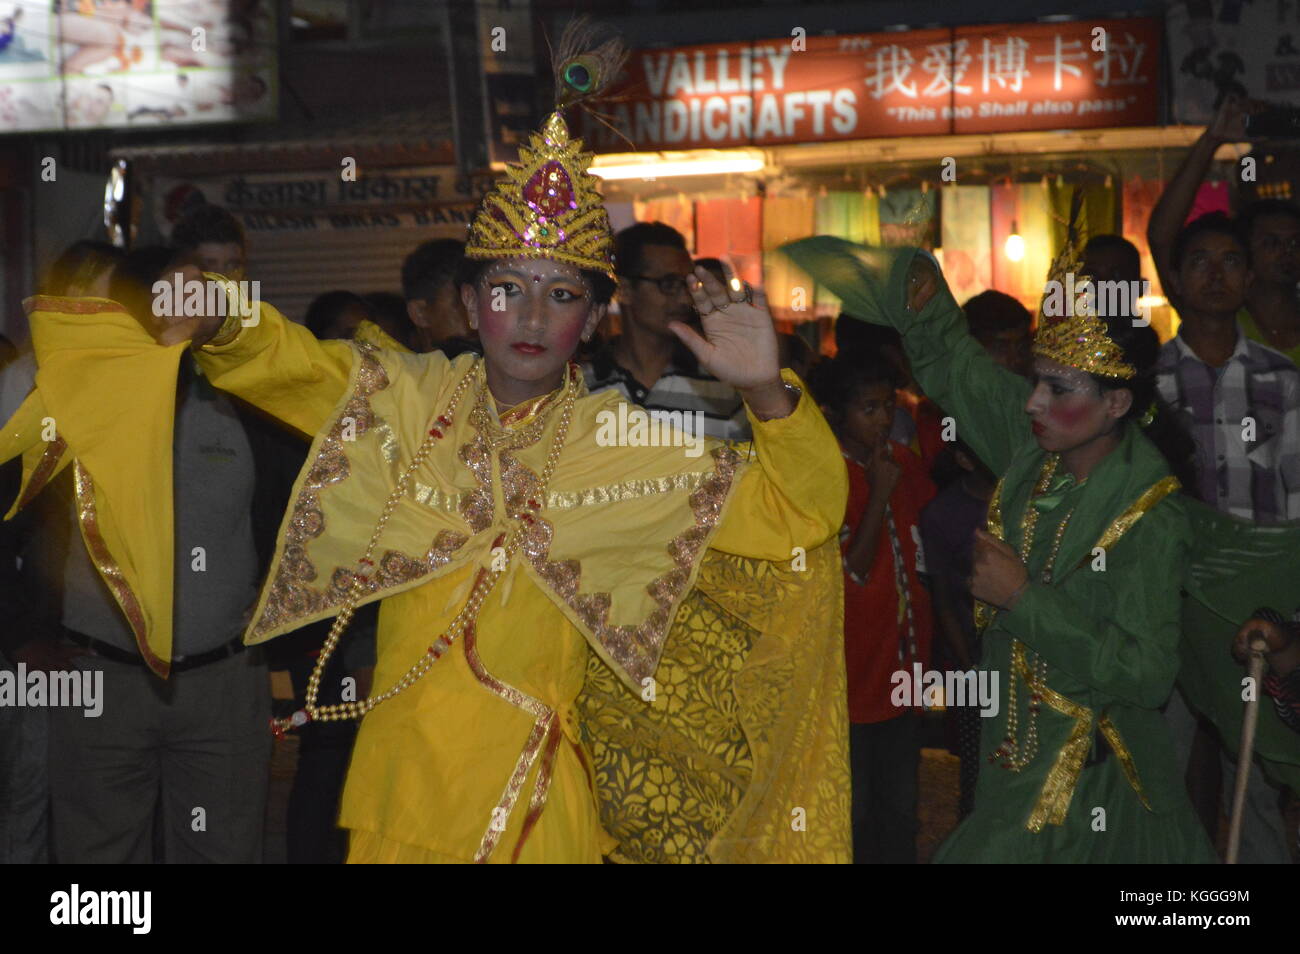 Girls in yellow dress and green dress dancing on the street at Nepalese news year's eve in April, Phokara, Nepal. Stock Photo